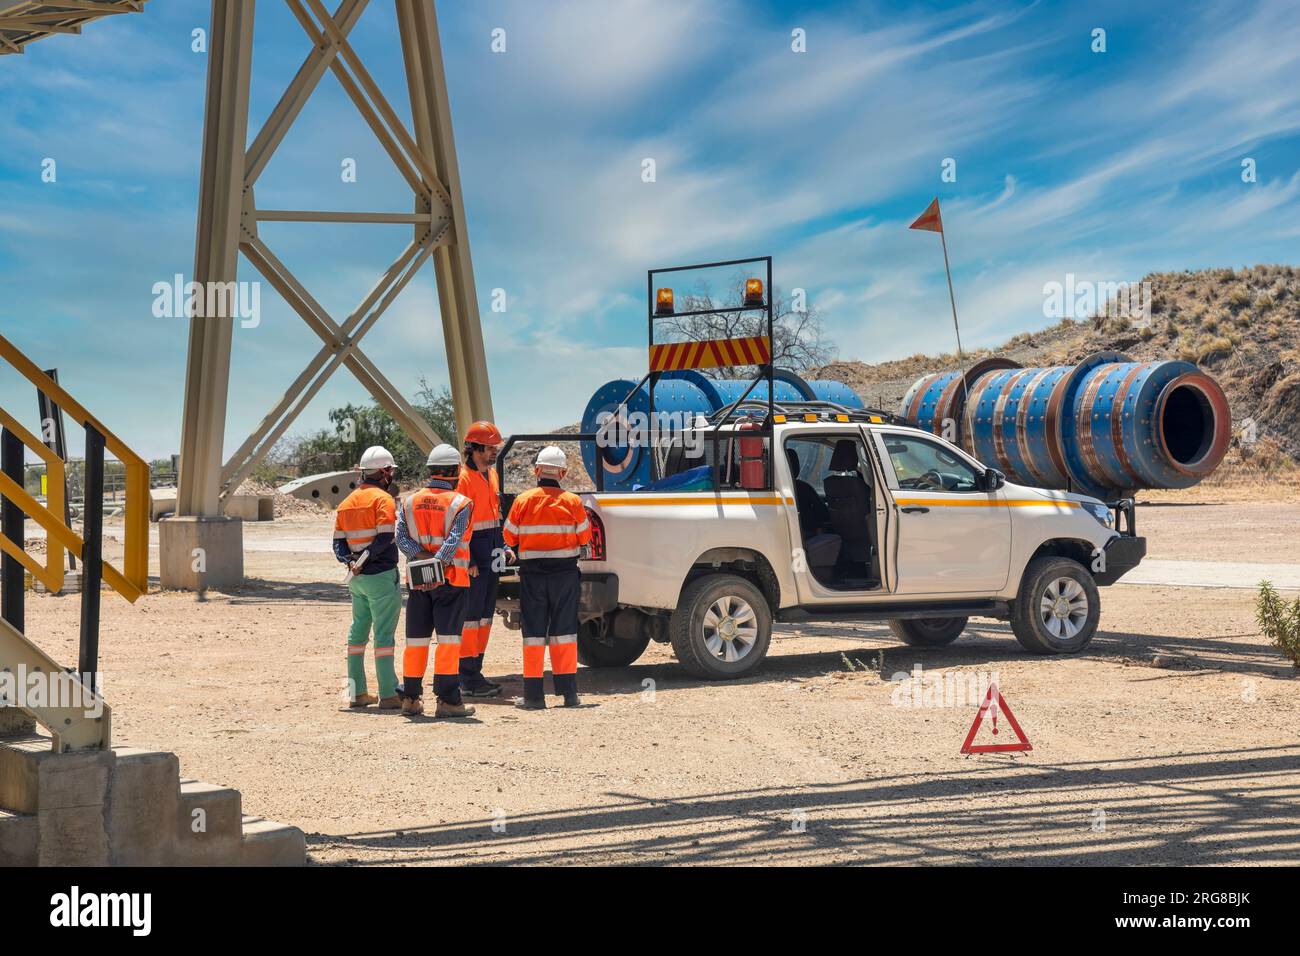 diamond mine managerial team discussing work plans behind a 4x4 vehicle on a dirt road under a bridge Stock Photo